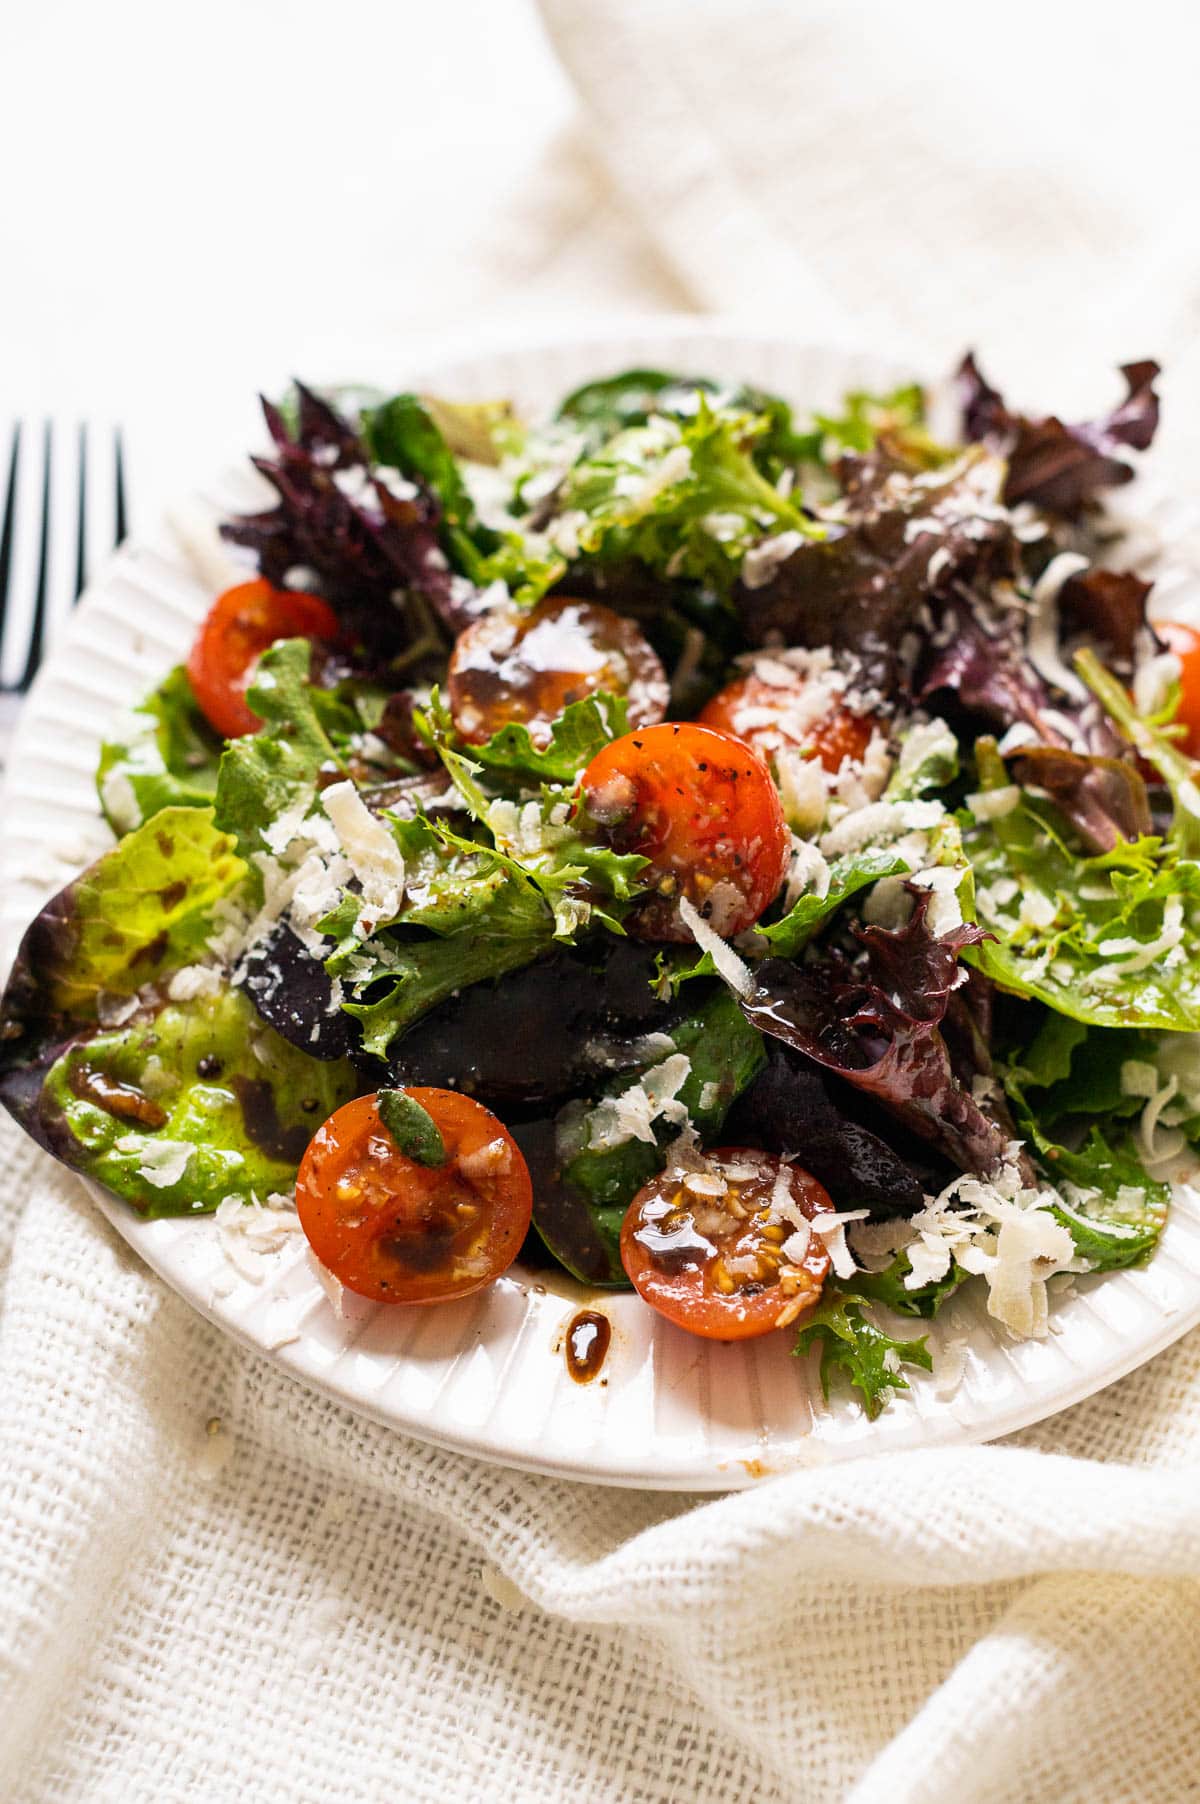 Spring mix salad with cherry tomatoes and parmesan cheese on white plate.